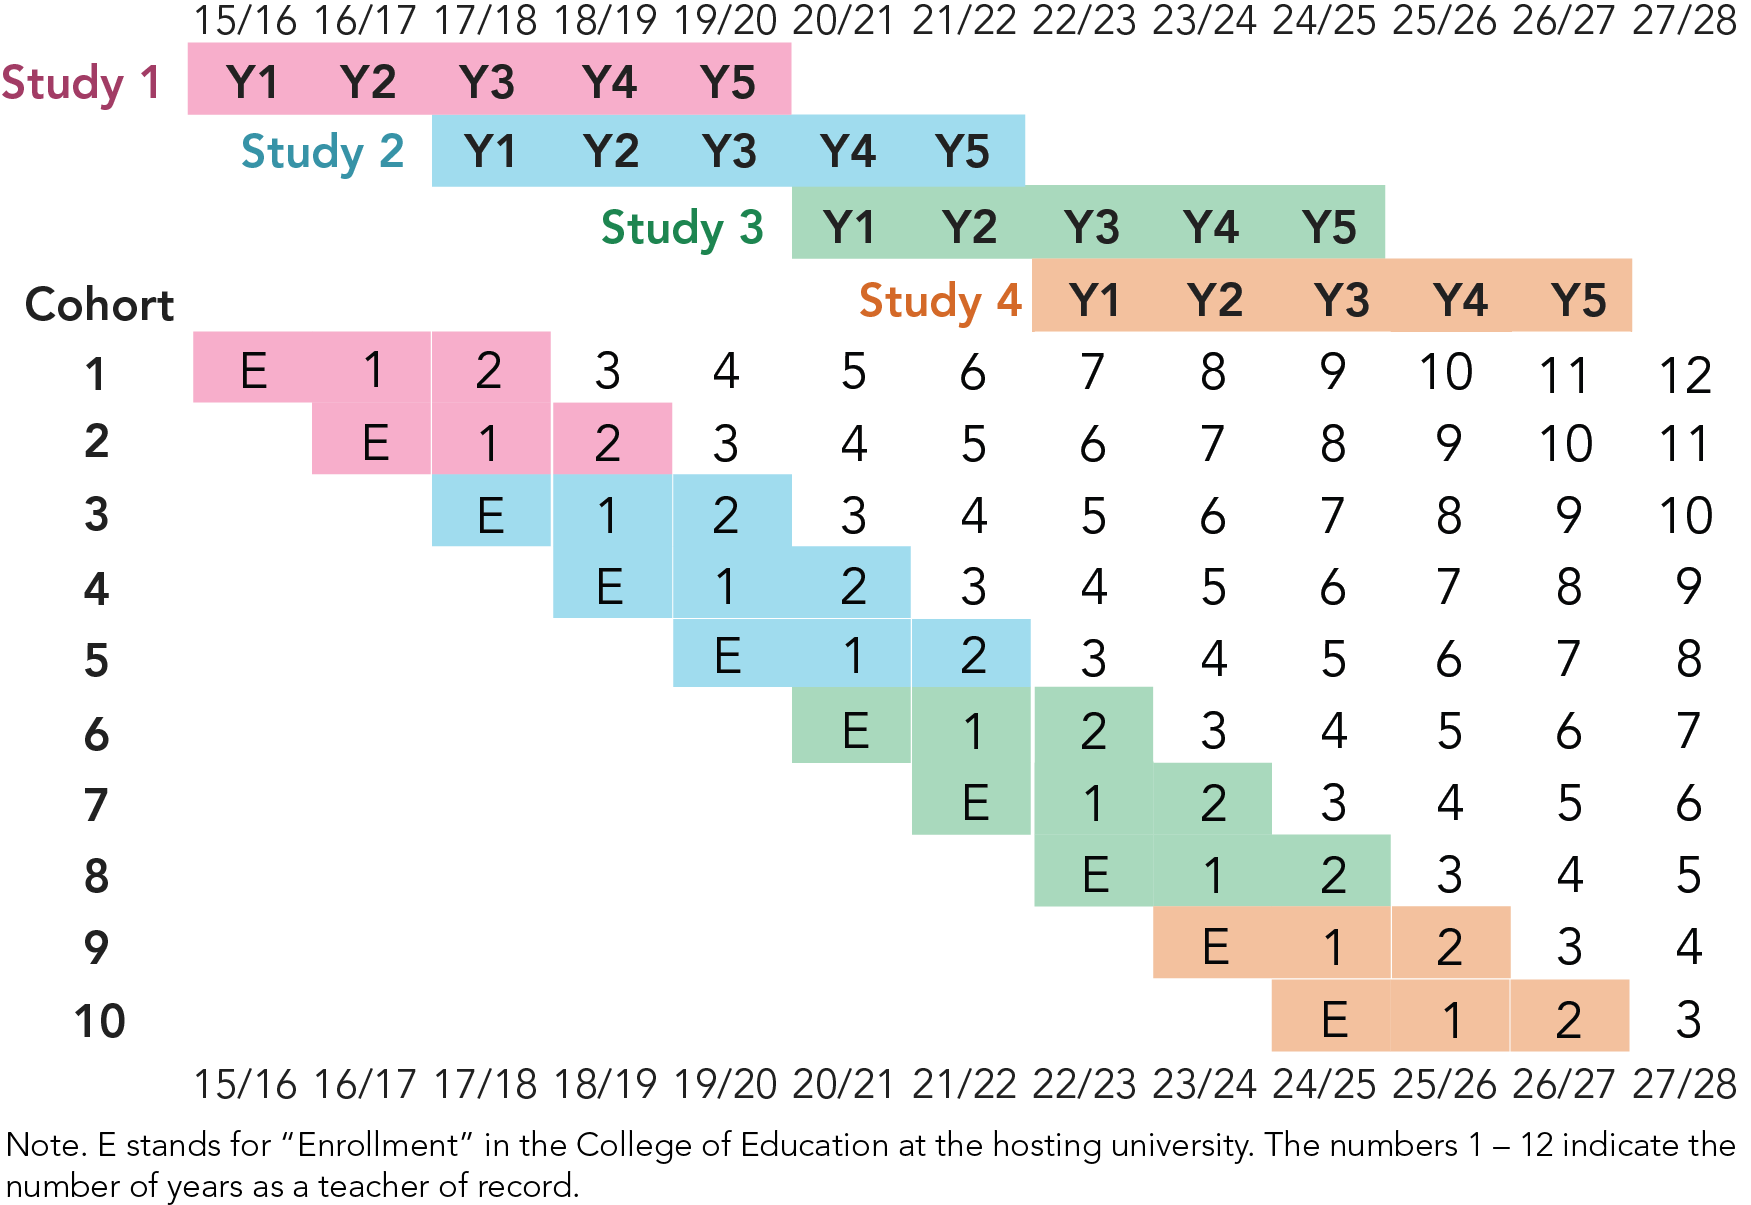 a table showing each CREATE cohort and which study each belongs to